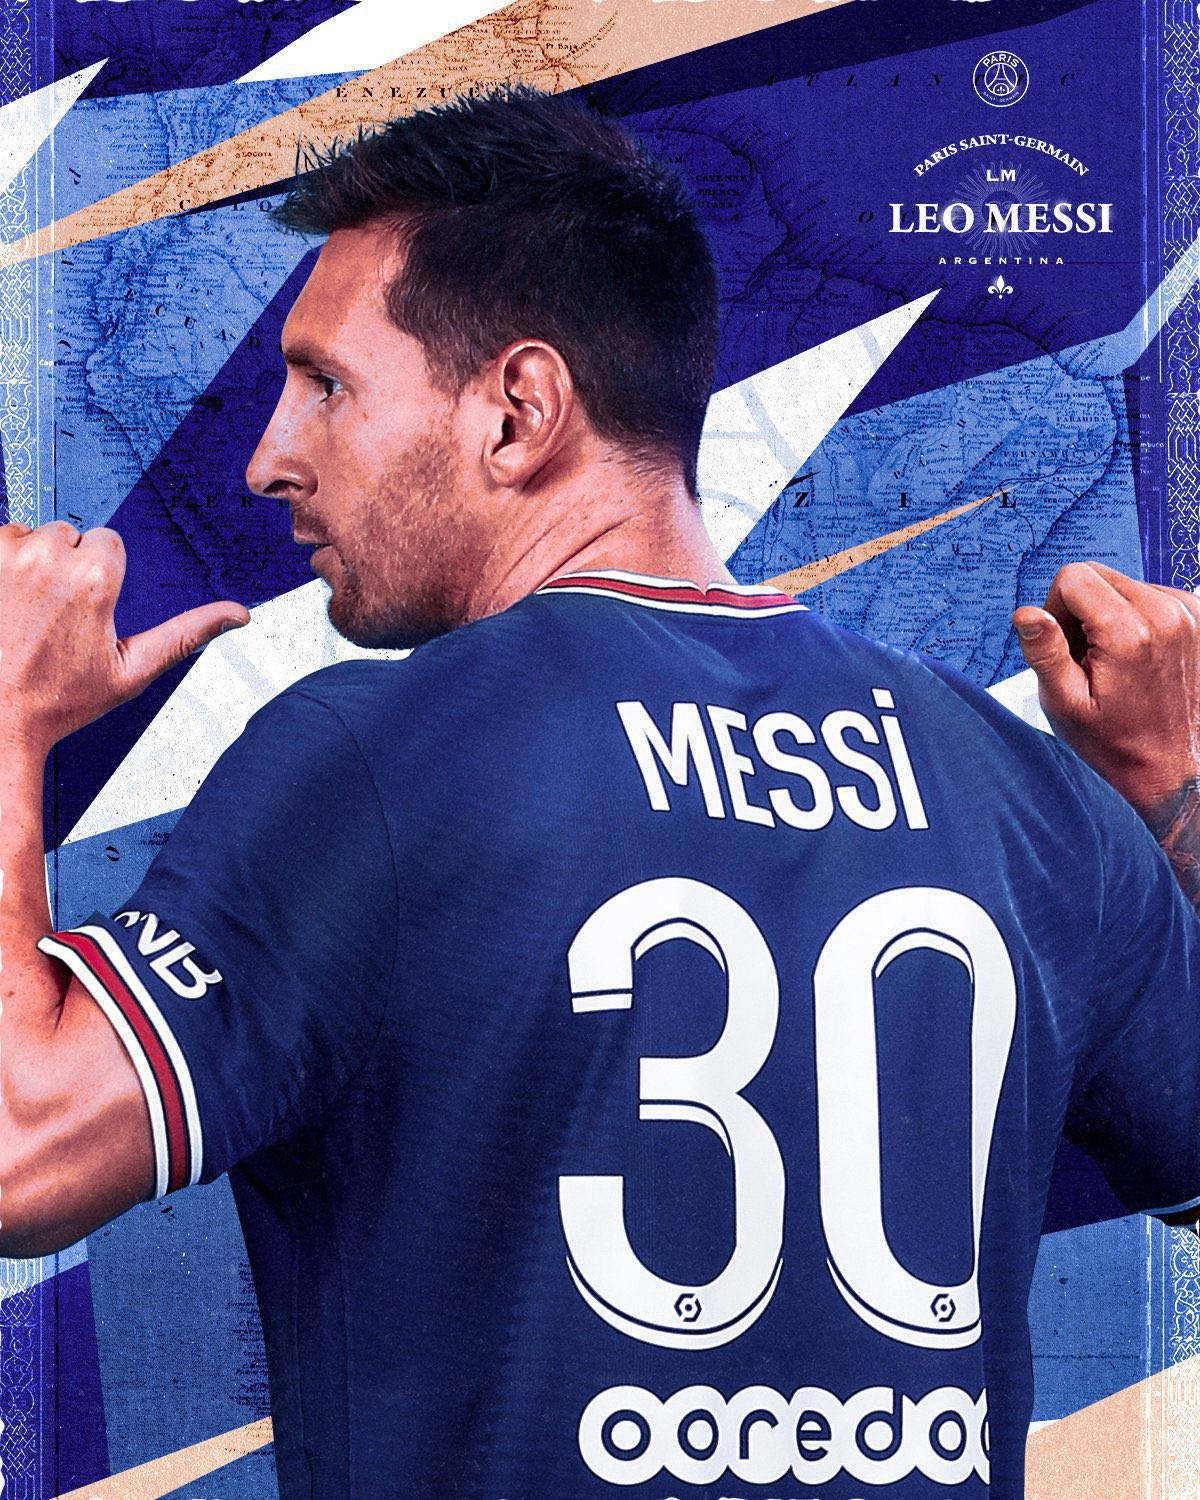 Messi Psg Blue 30 Jersey Background